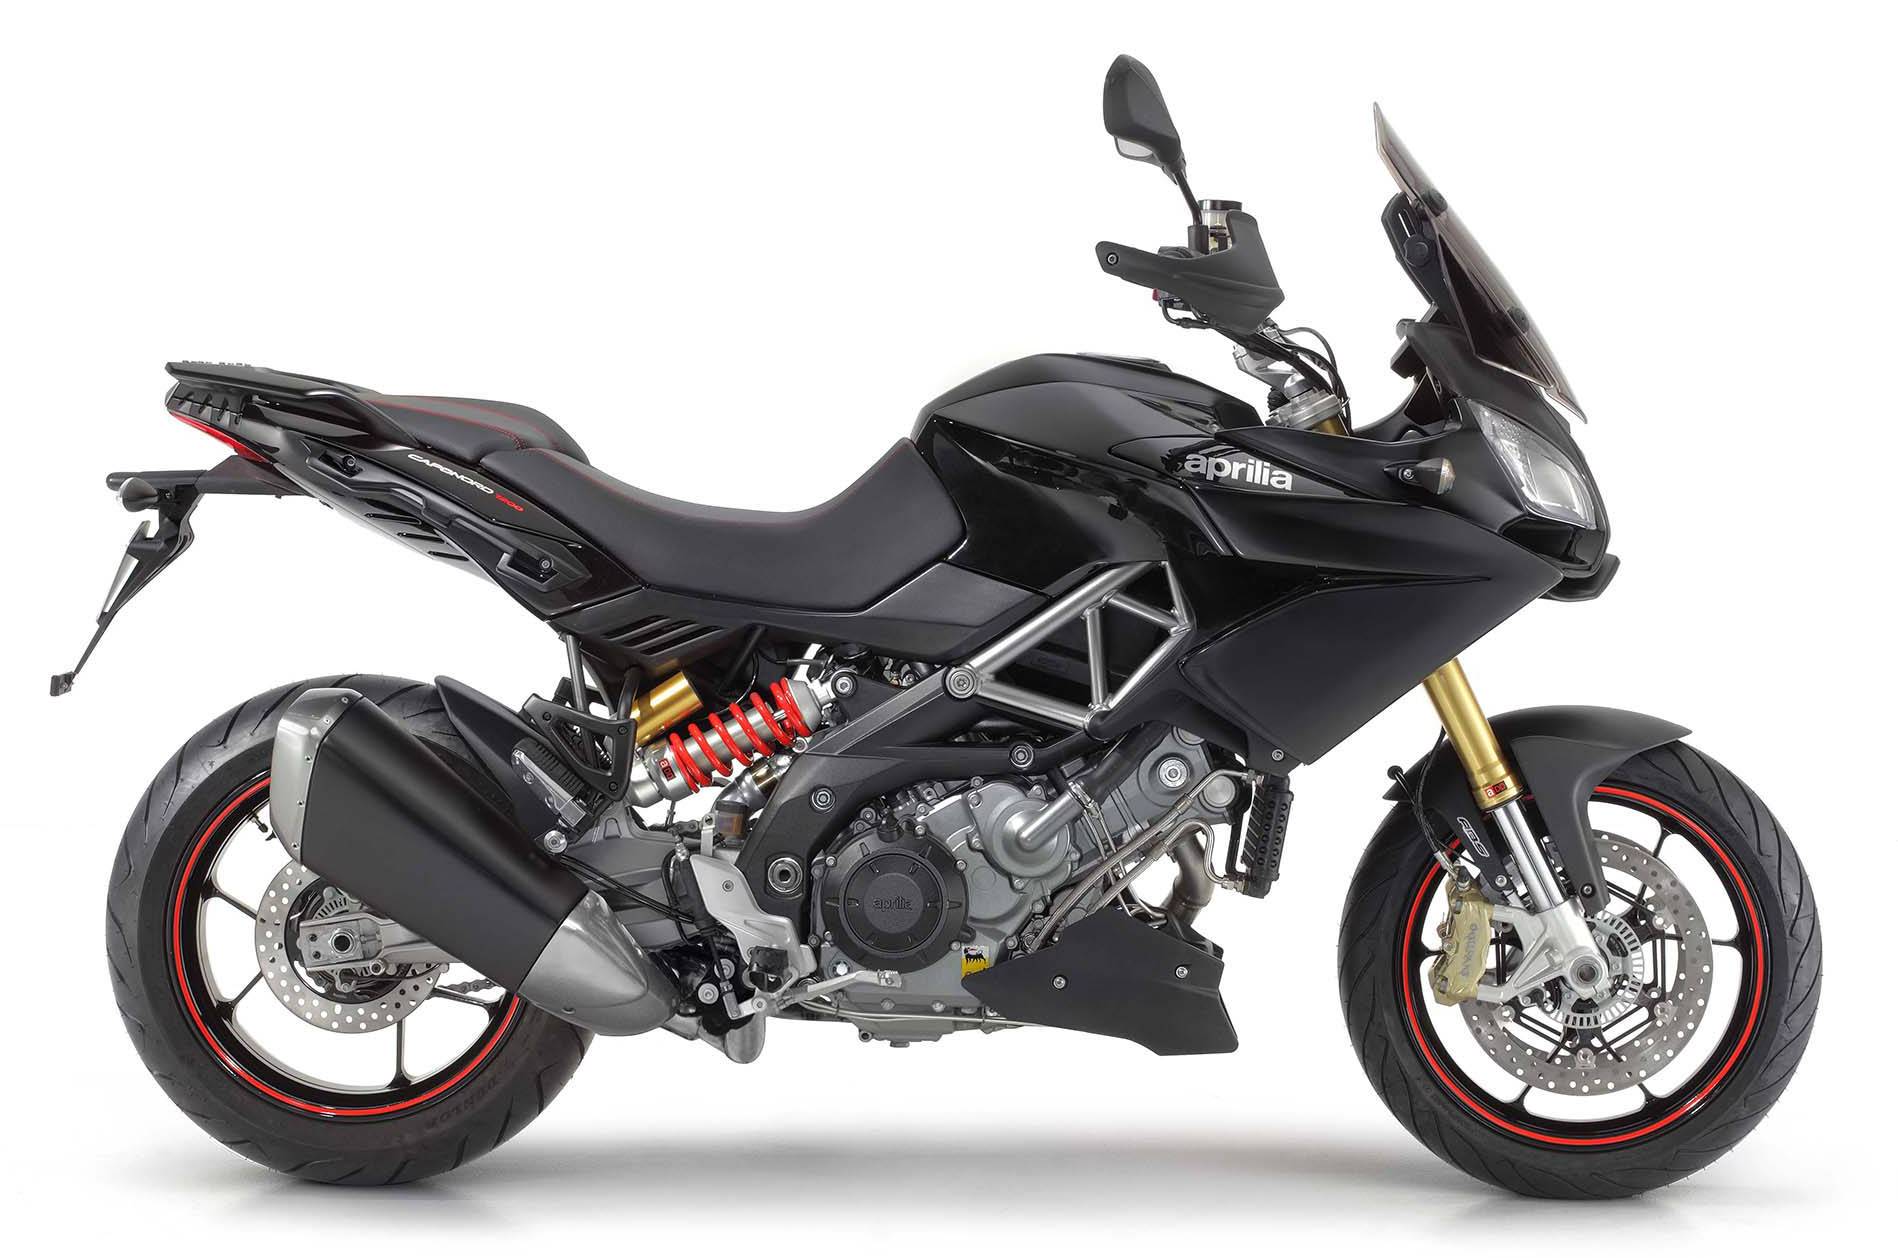 Review of aprilia caponord 1200 abs travel pack